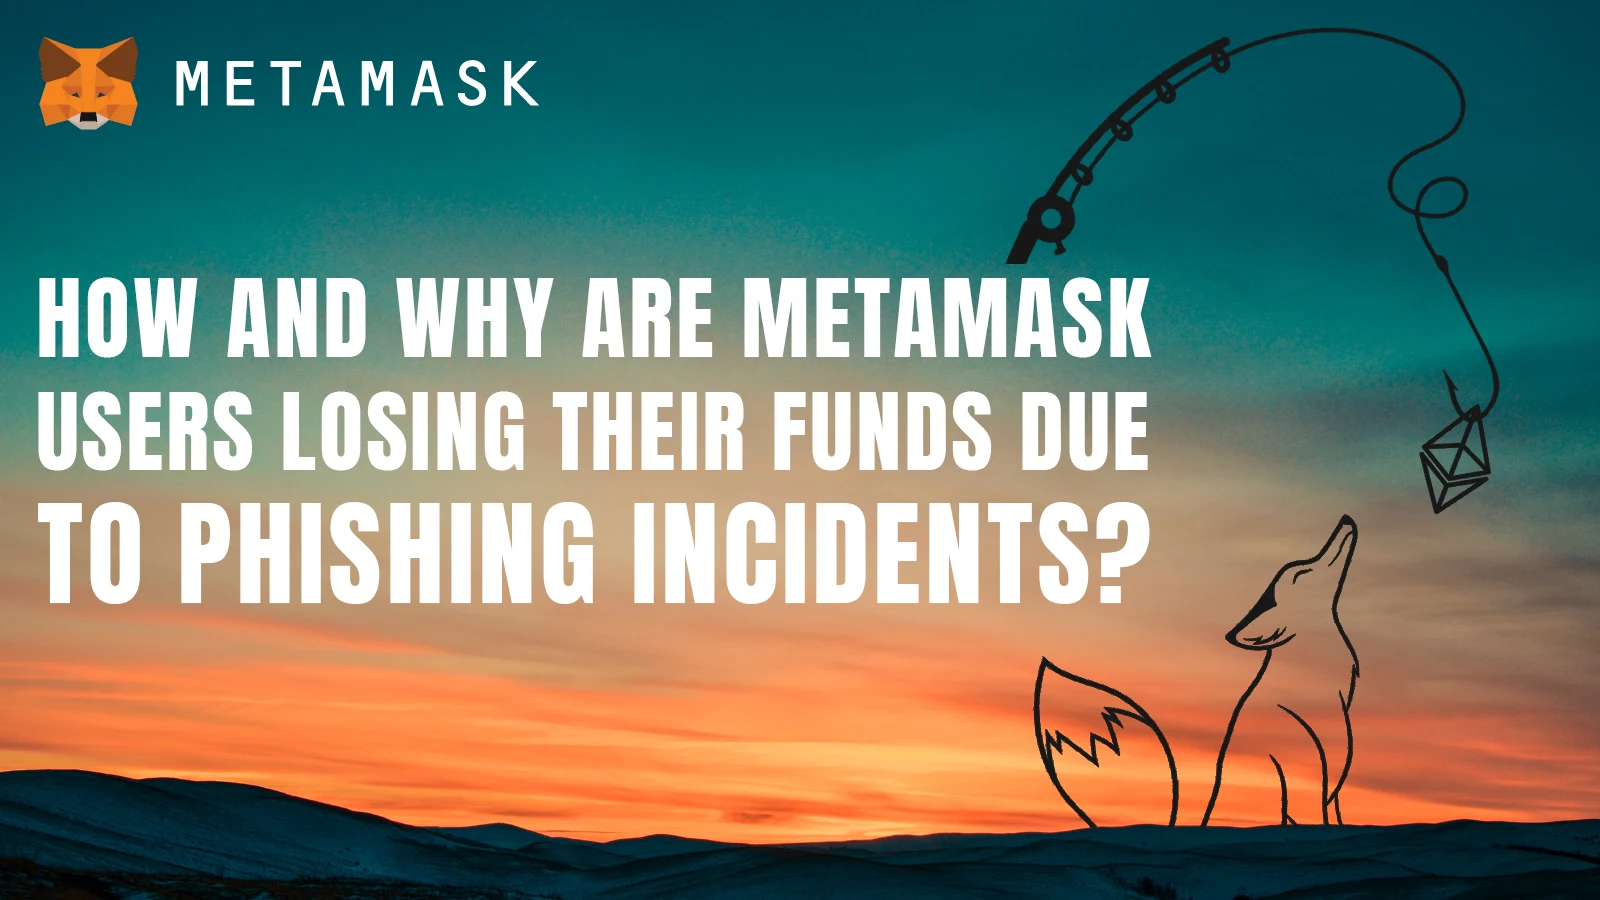 Image: How and Why are MetaMask Users Losing their Funds due to Phishing Incidents?